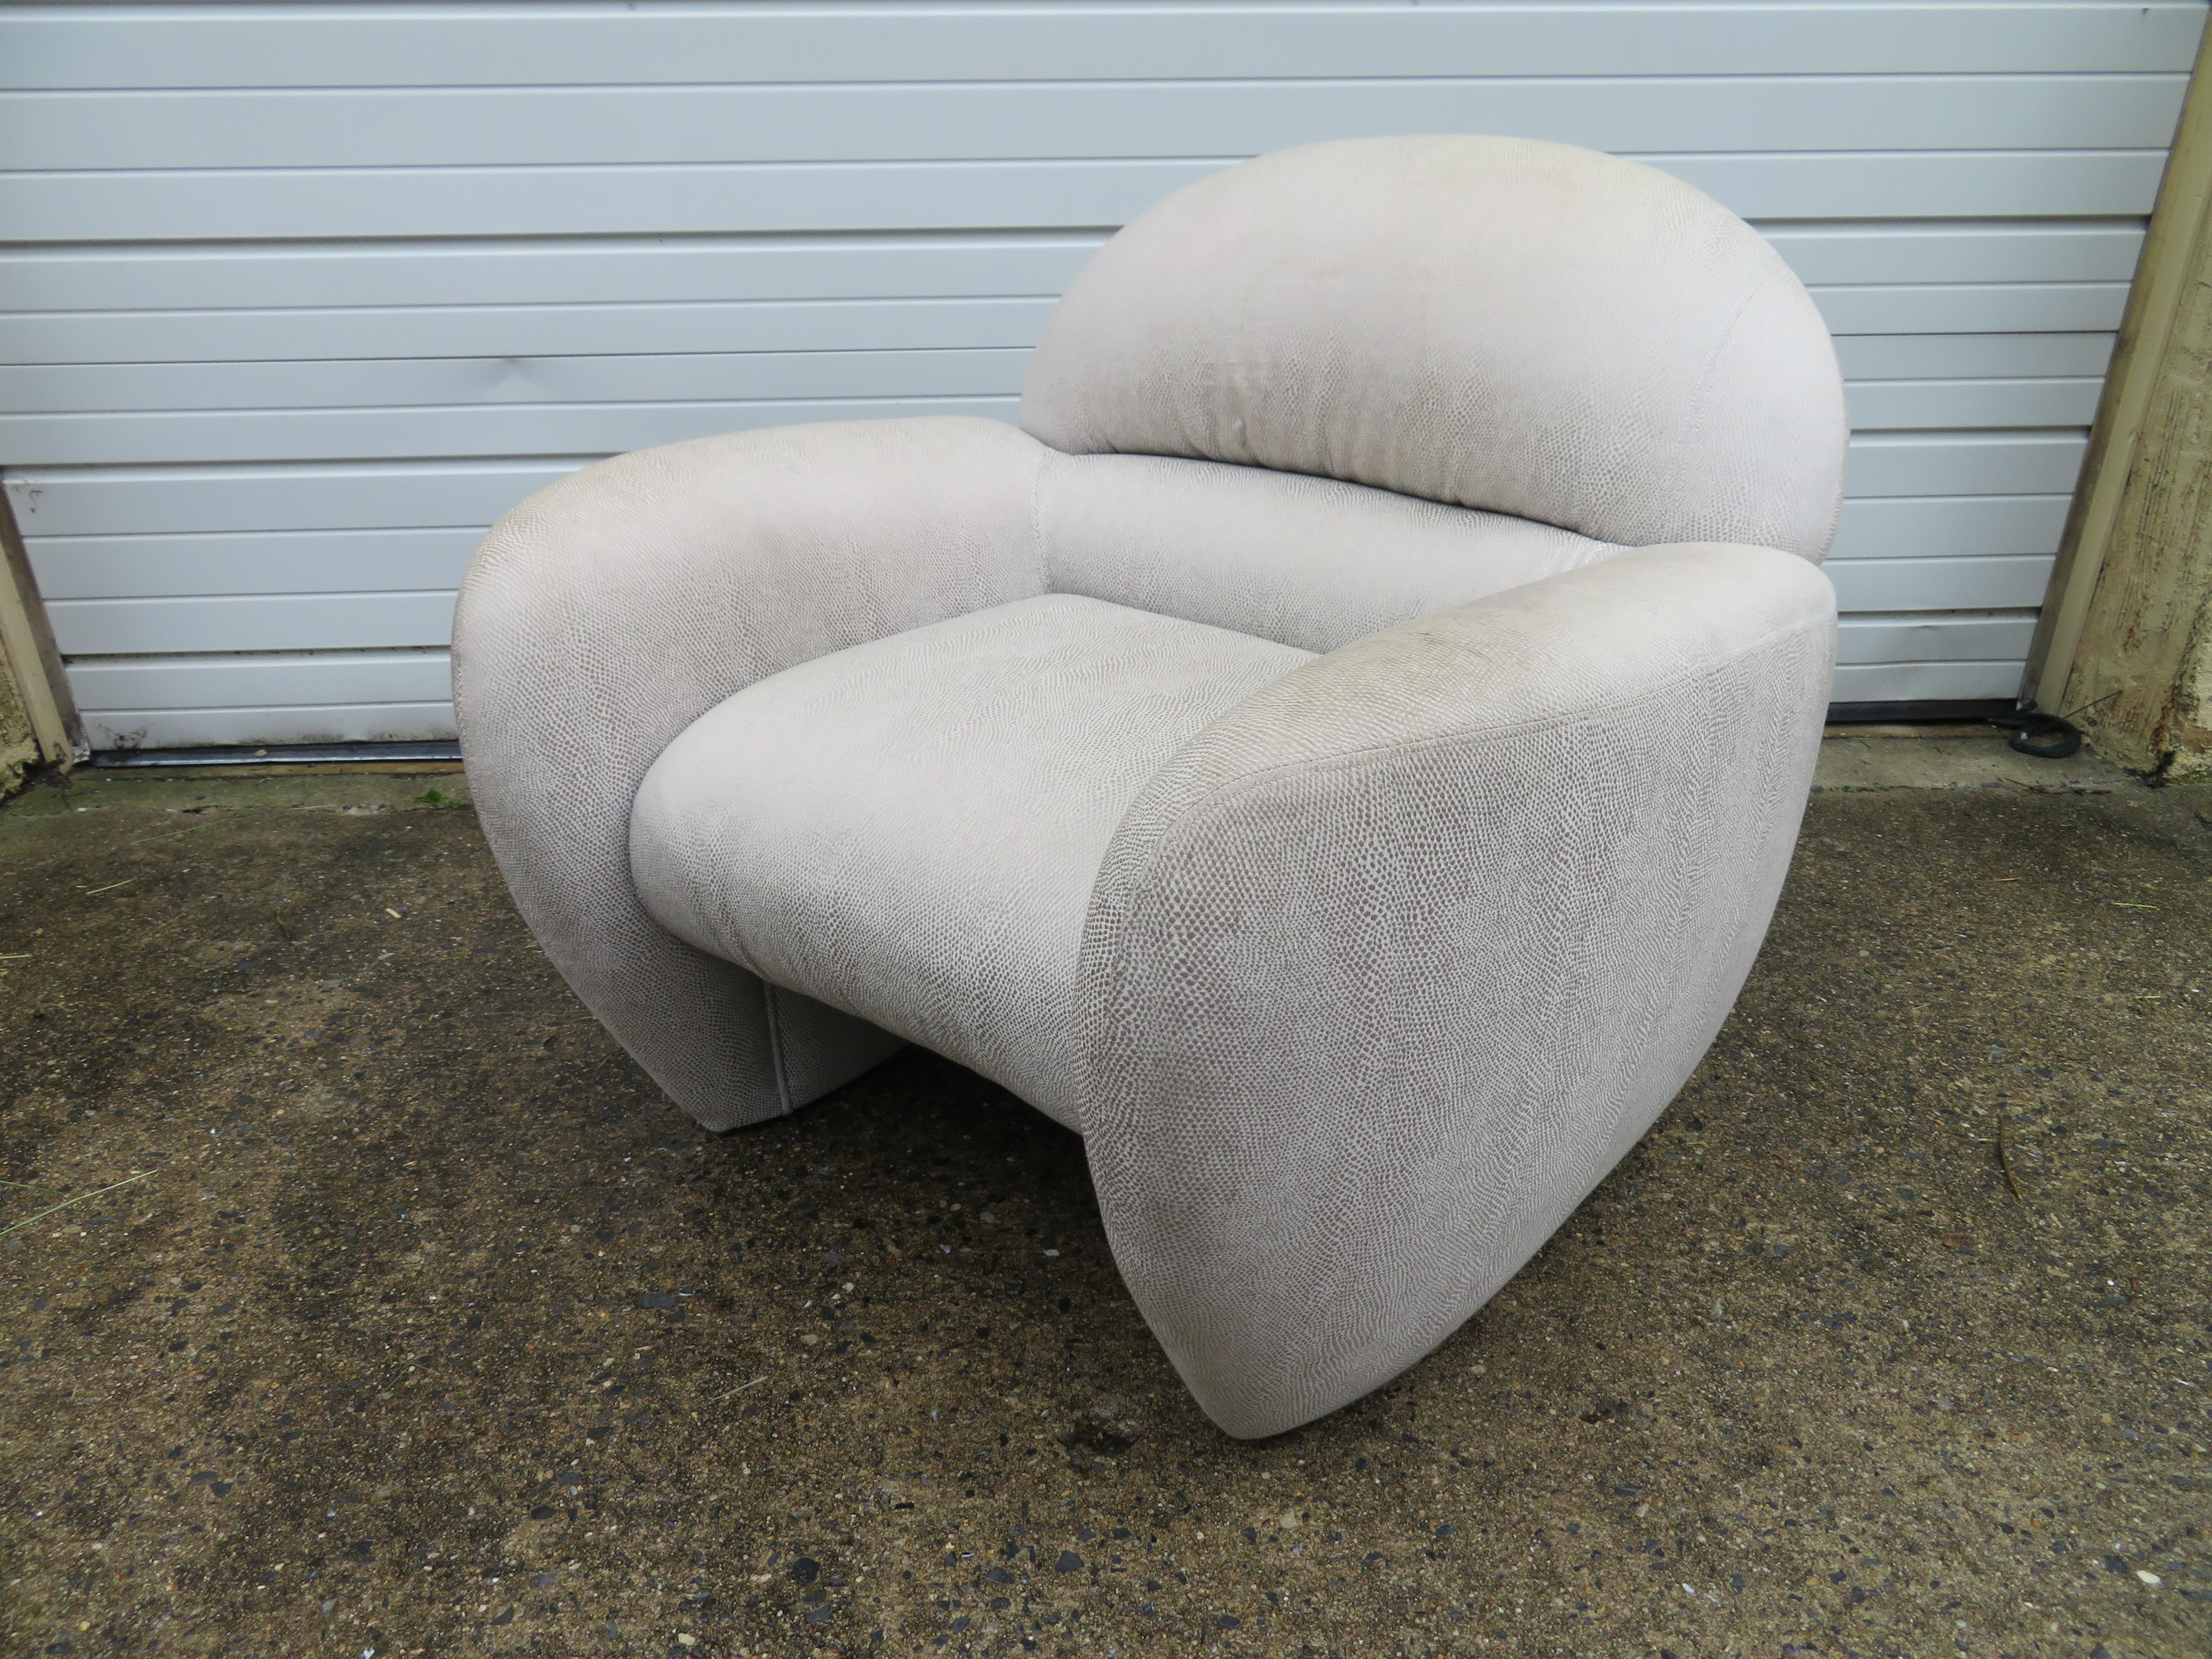 Late 20th Century Lovely Vladimir Kagan for Preview Lounge Chair Ottoman Mid-Century Modern